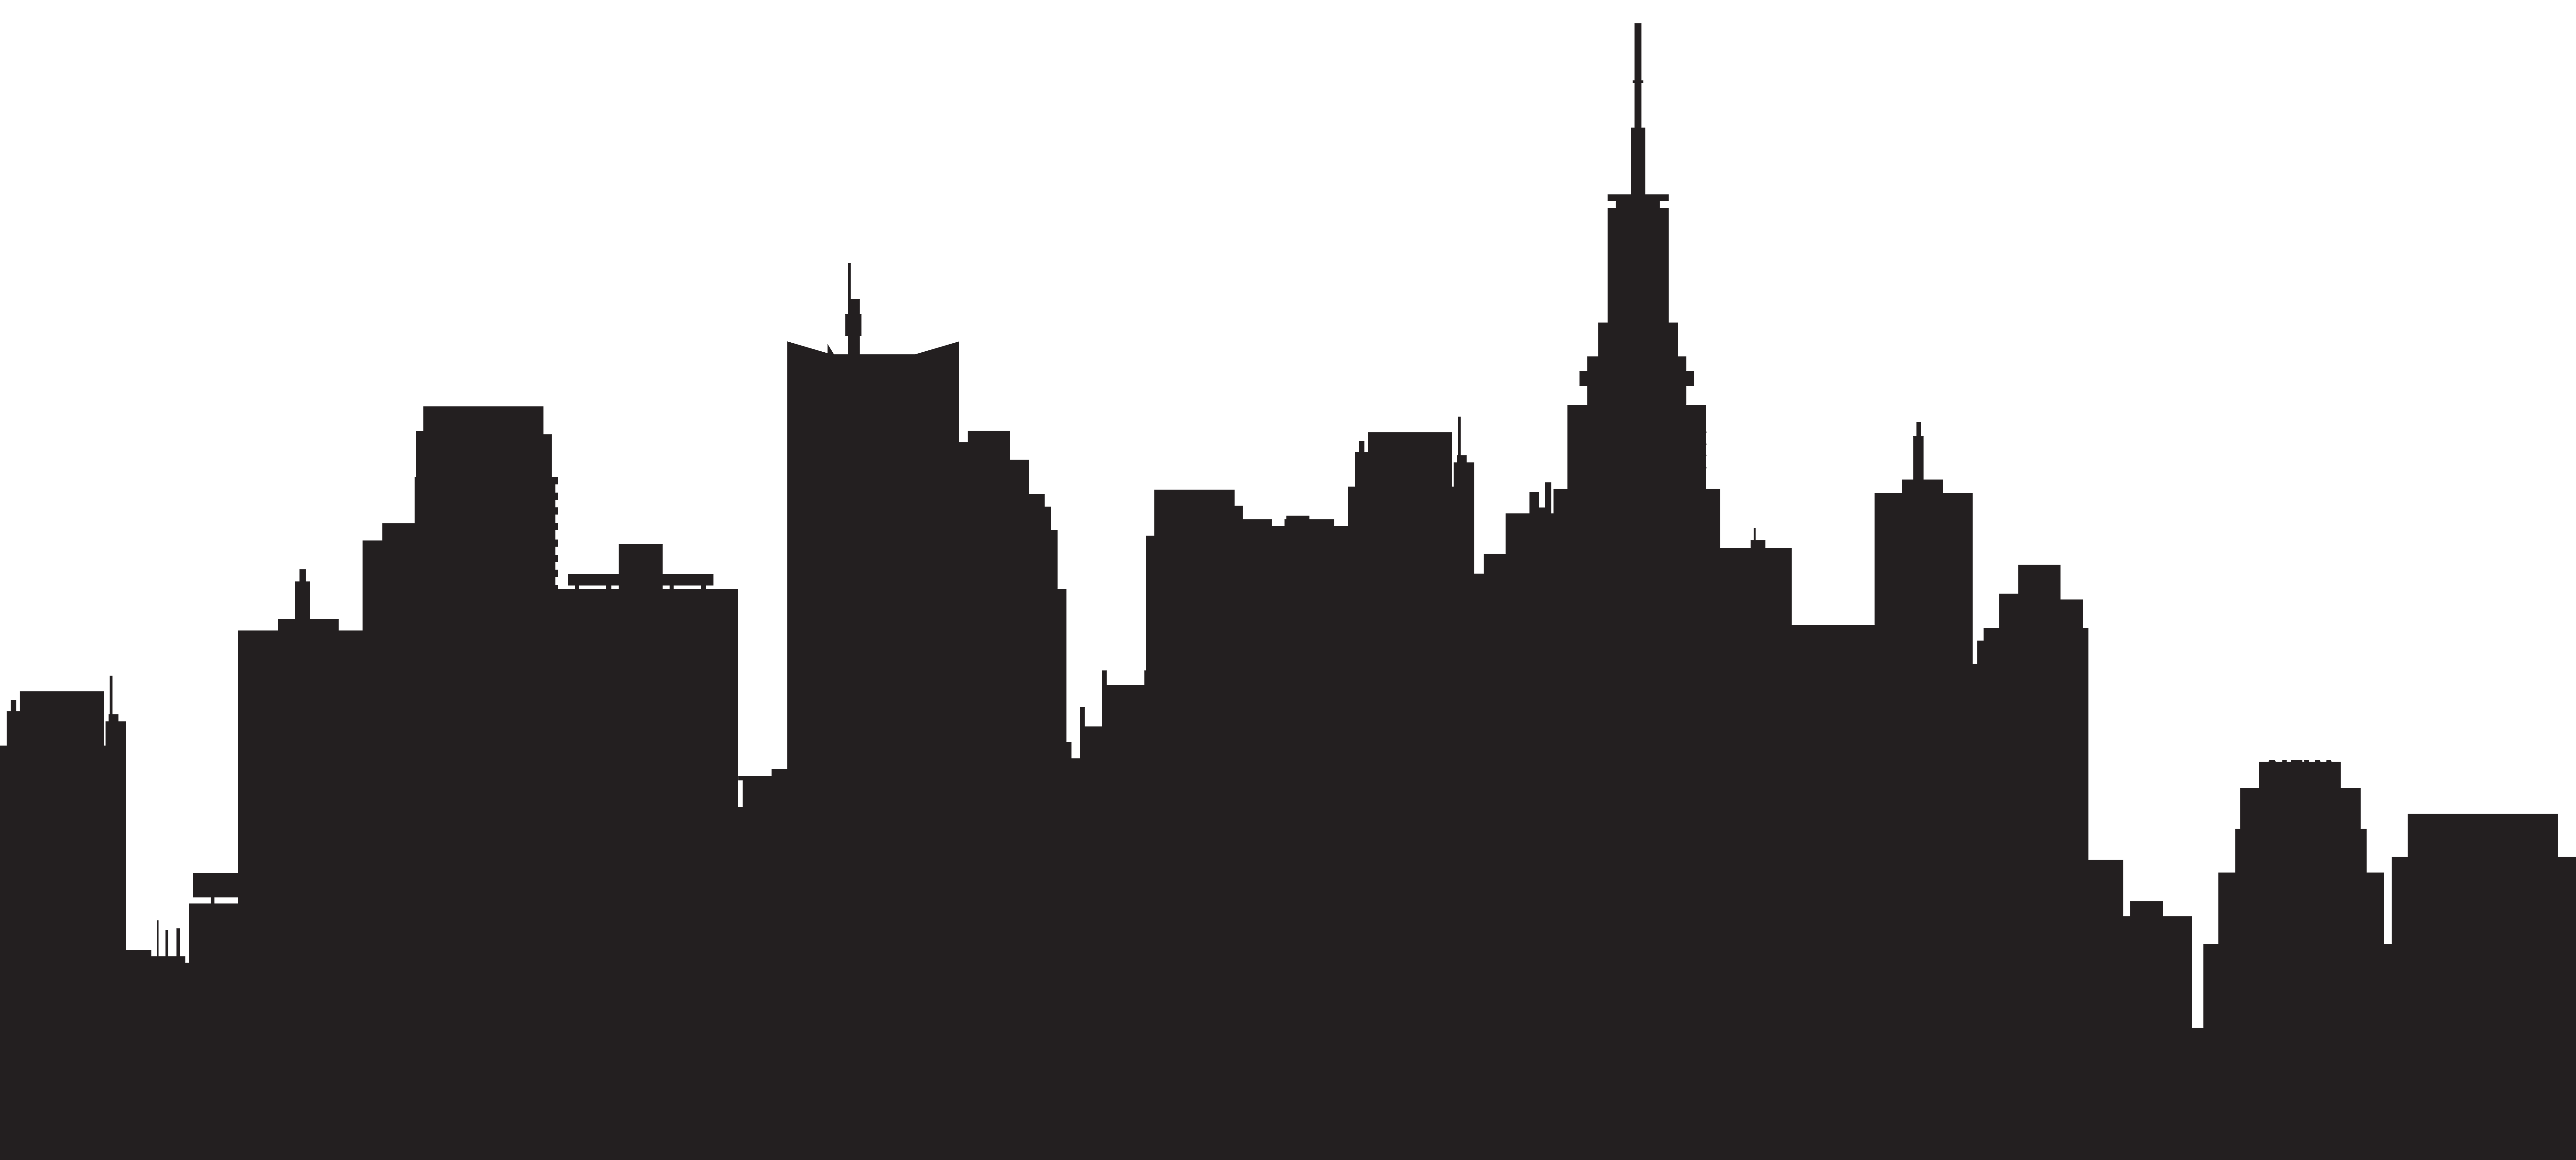 Cityscape Silhouette Background PNG Image